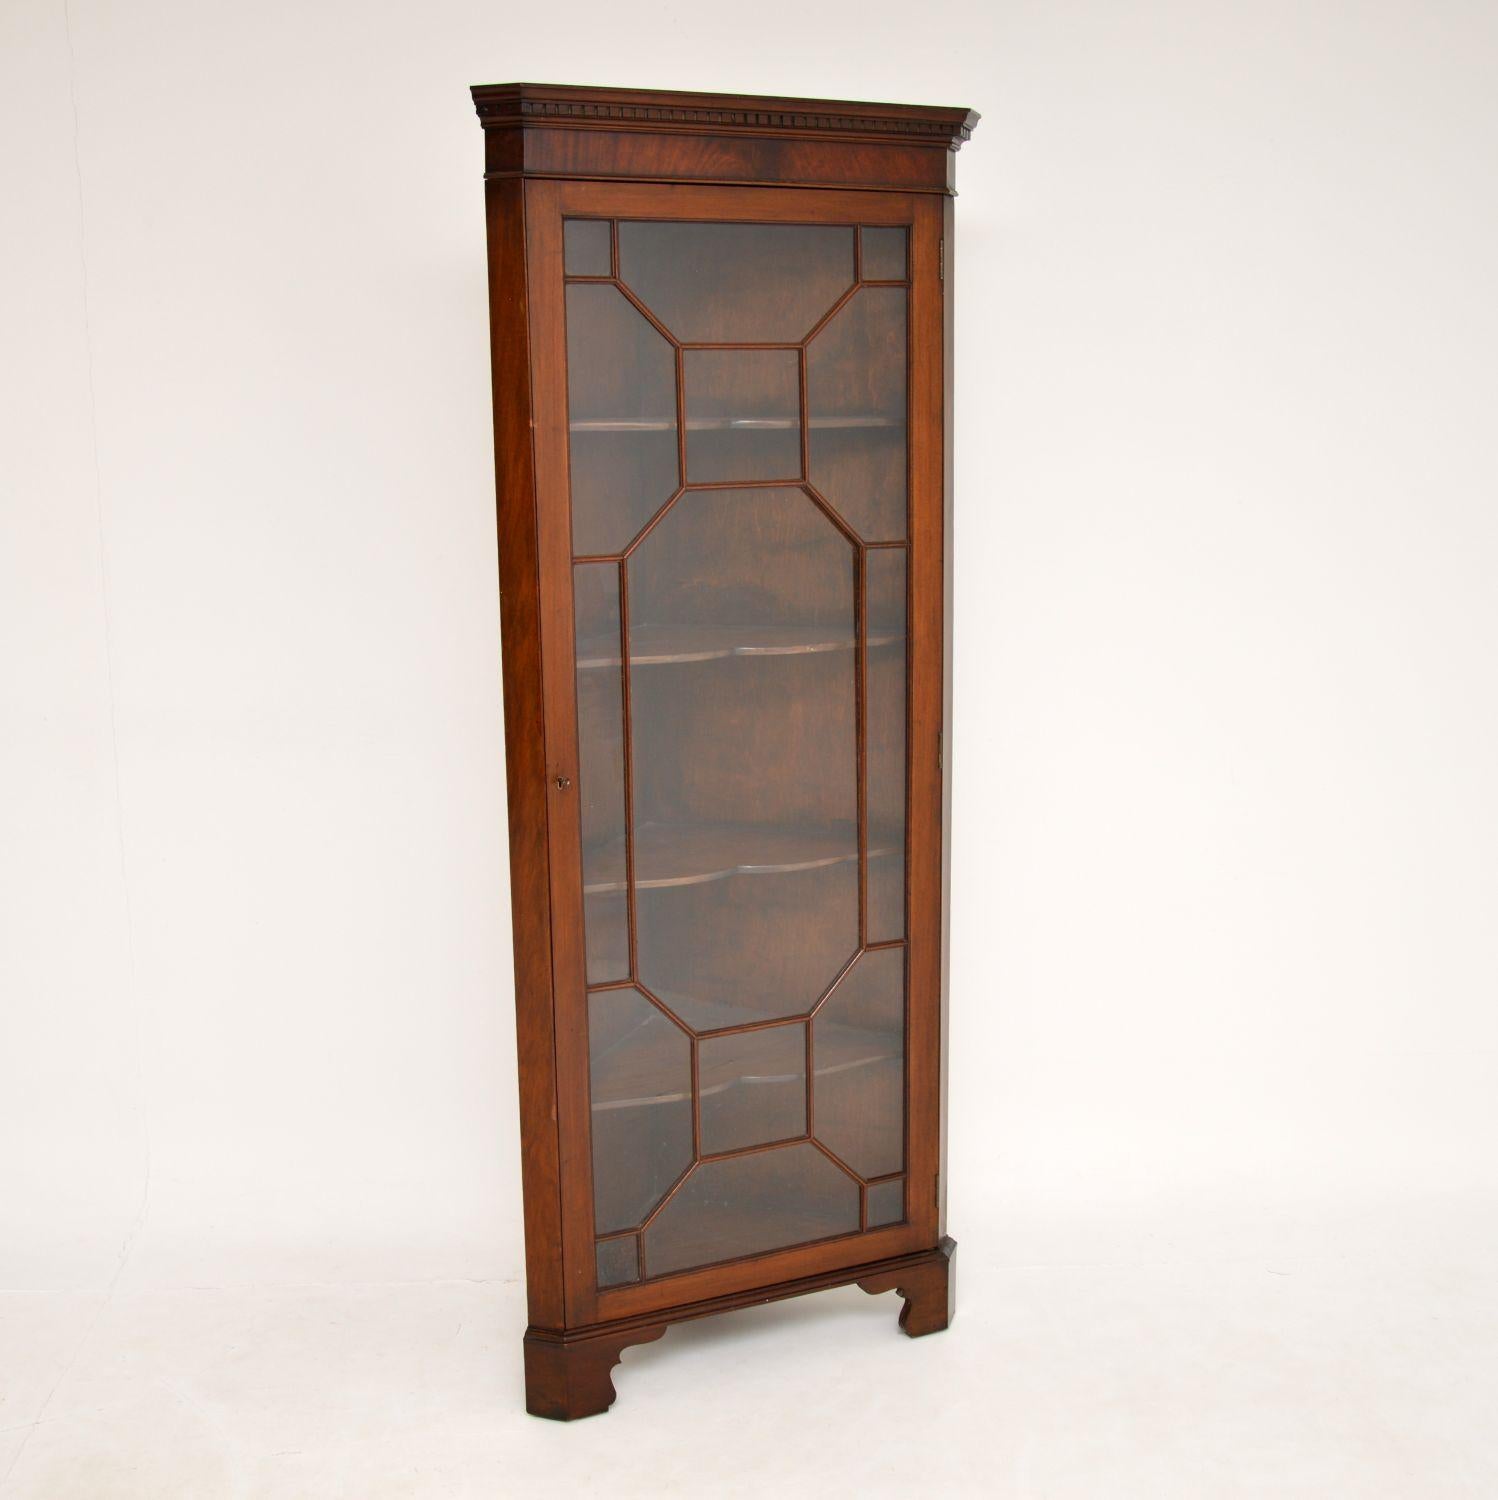 An excellent antique Edwardian corner cabinet in wood. This was made in England, it dates from around the 1900-1910 period.
The quality is great, this is very well made with a large astral glazed door on the front. It sits on bracket feet and has a